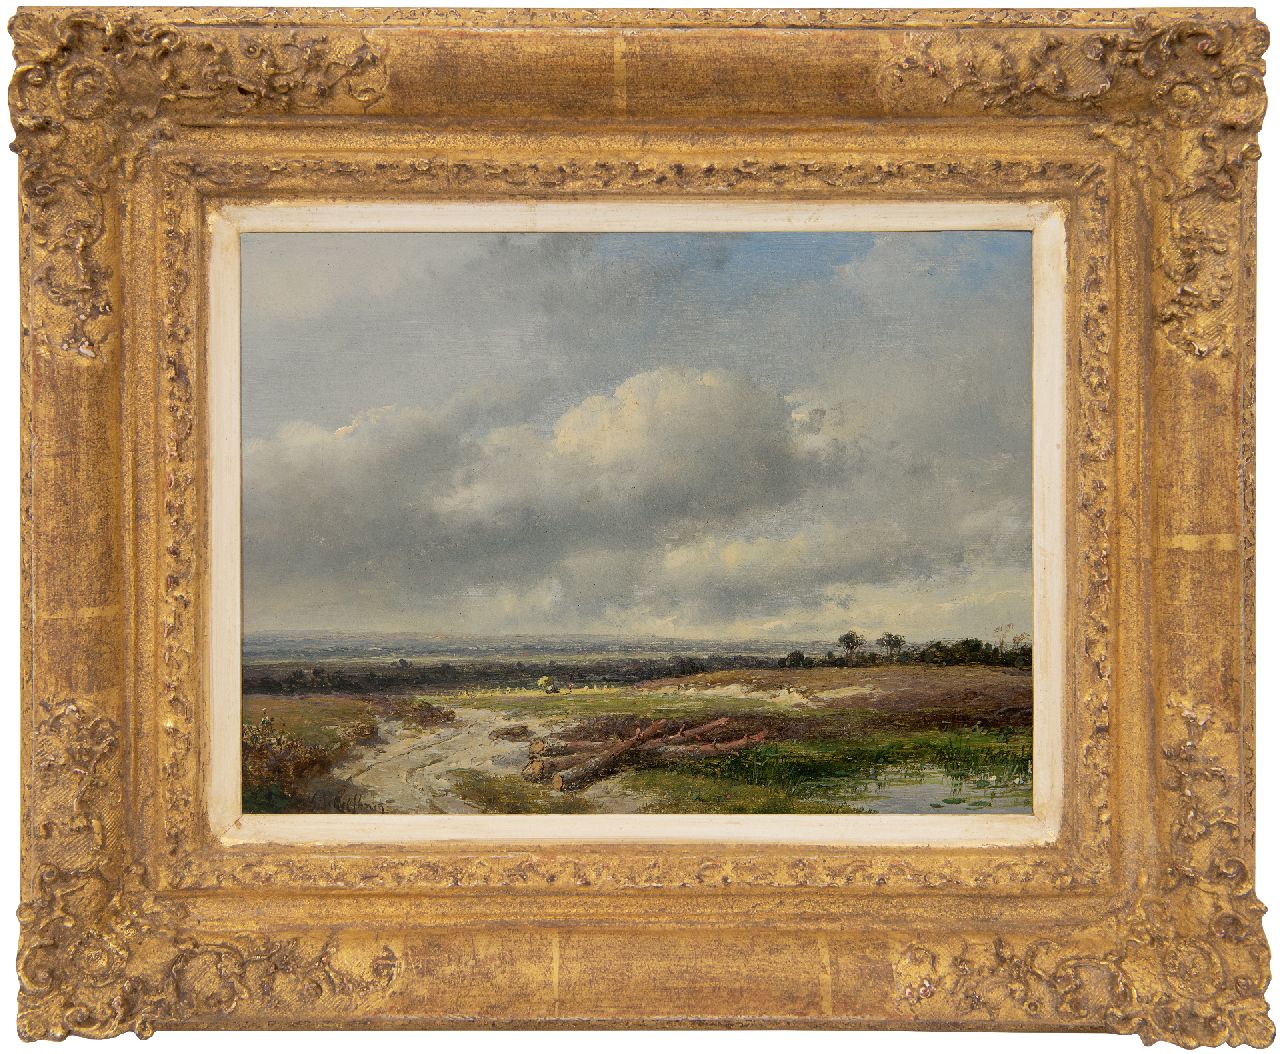 Schelfhout A.  | Andreas Schelfhout | Paintings offered for sale | Panoramic landscape under a Dutch sky, oil on panel 17.8 x 24.0 cm, signed l.l.